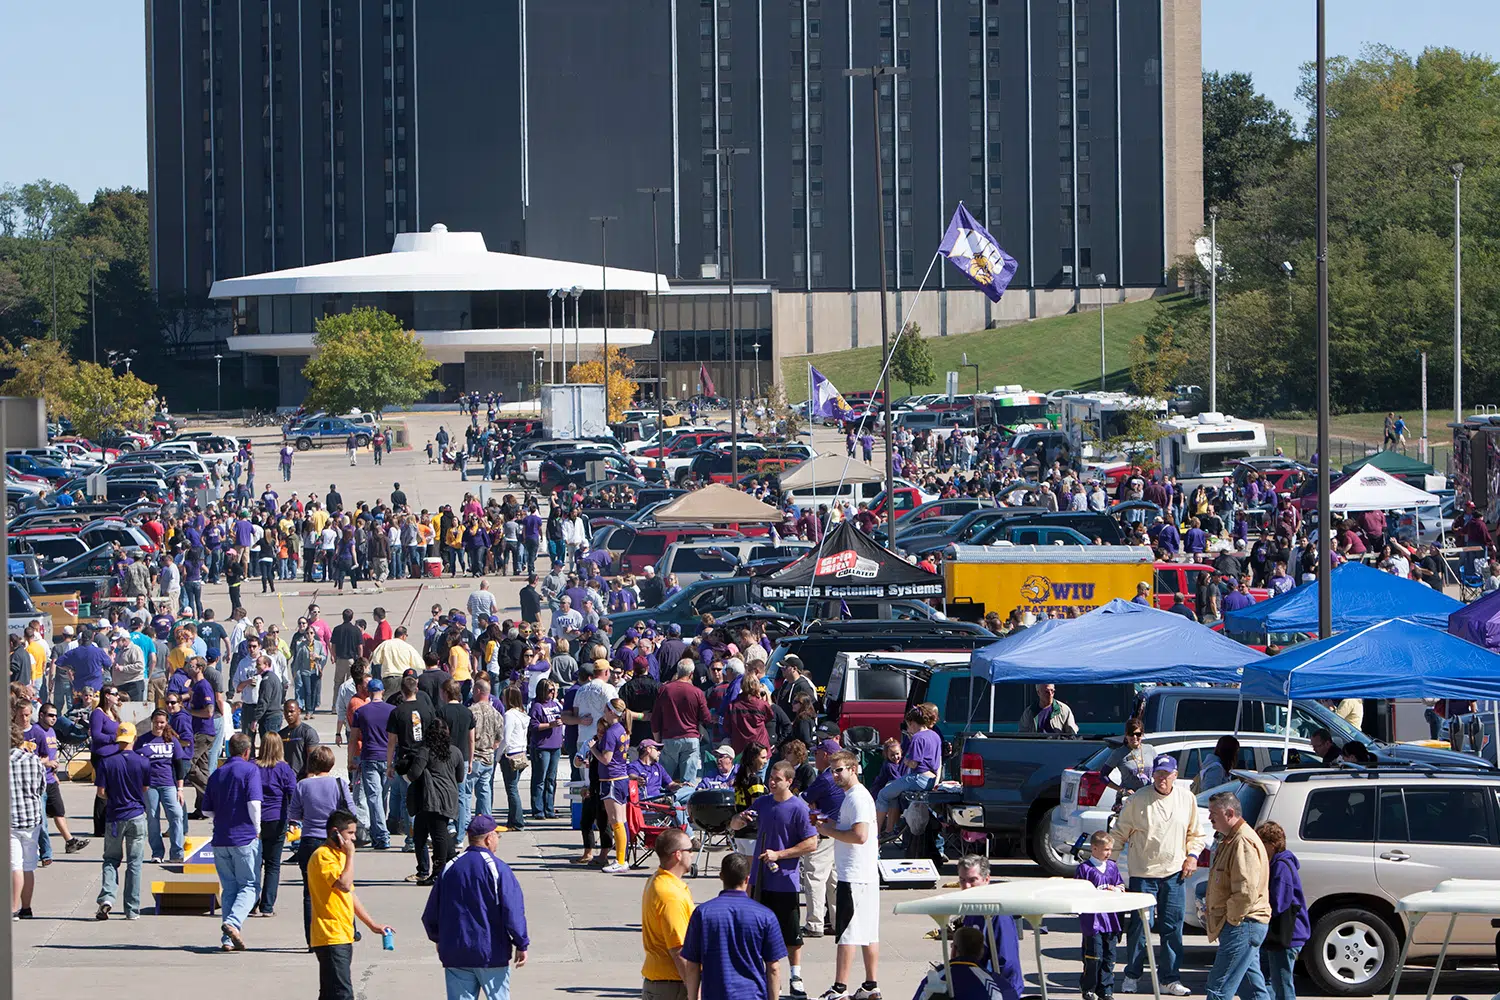 Western Illinois University To Try Beer Sales At Football Games